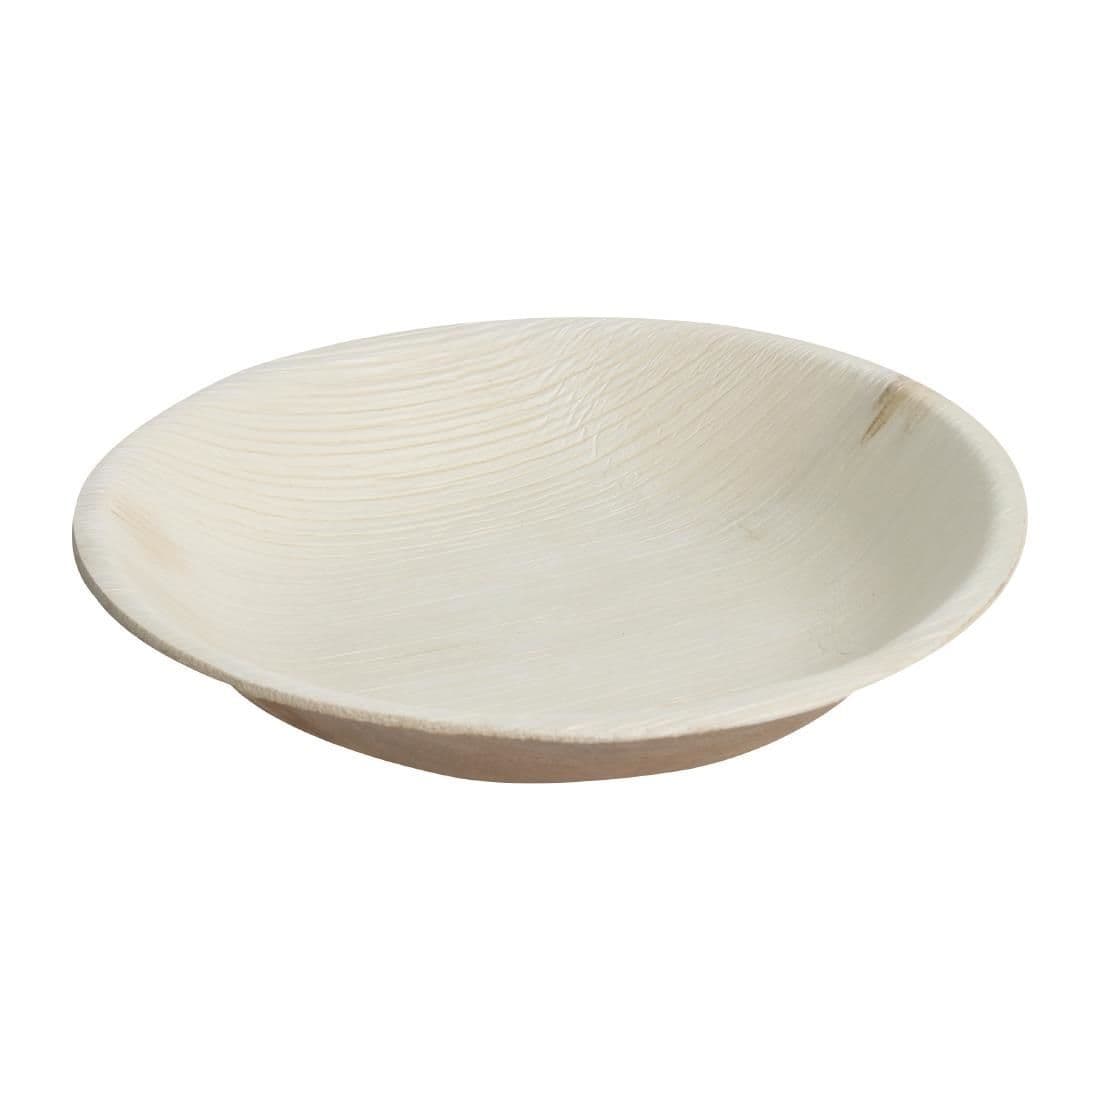 DK377 Fiesta Green Biodegradable Deep Palm Leaf Plates Round 175mm (Pack of 100) JD Catering Equipment Solutions Ltd